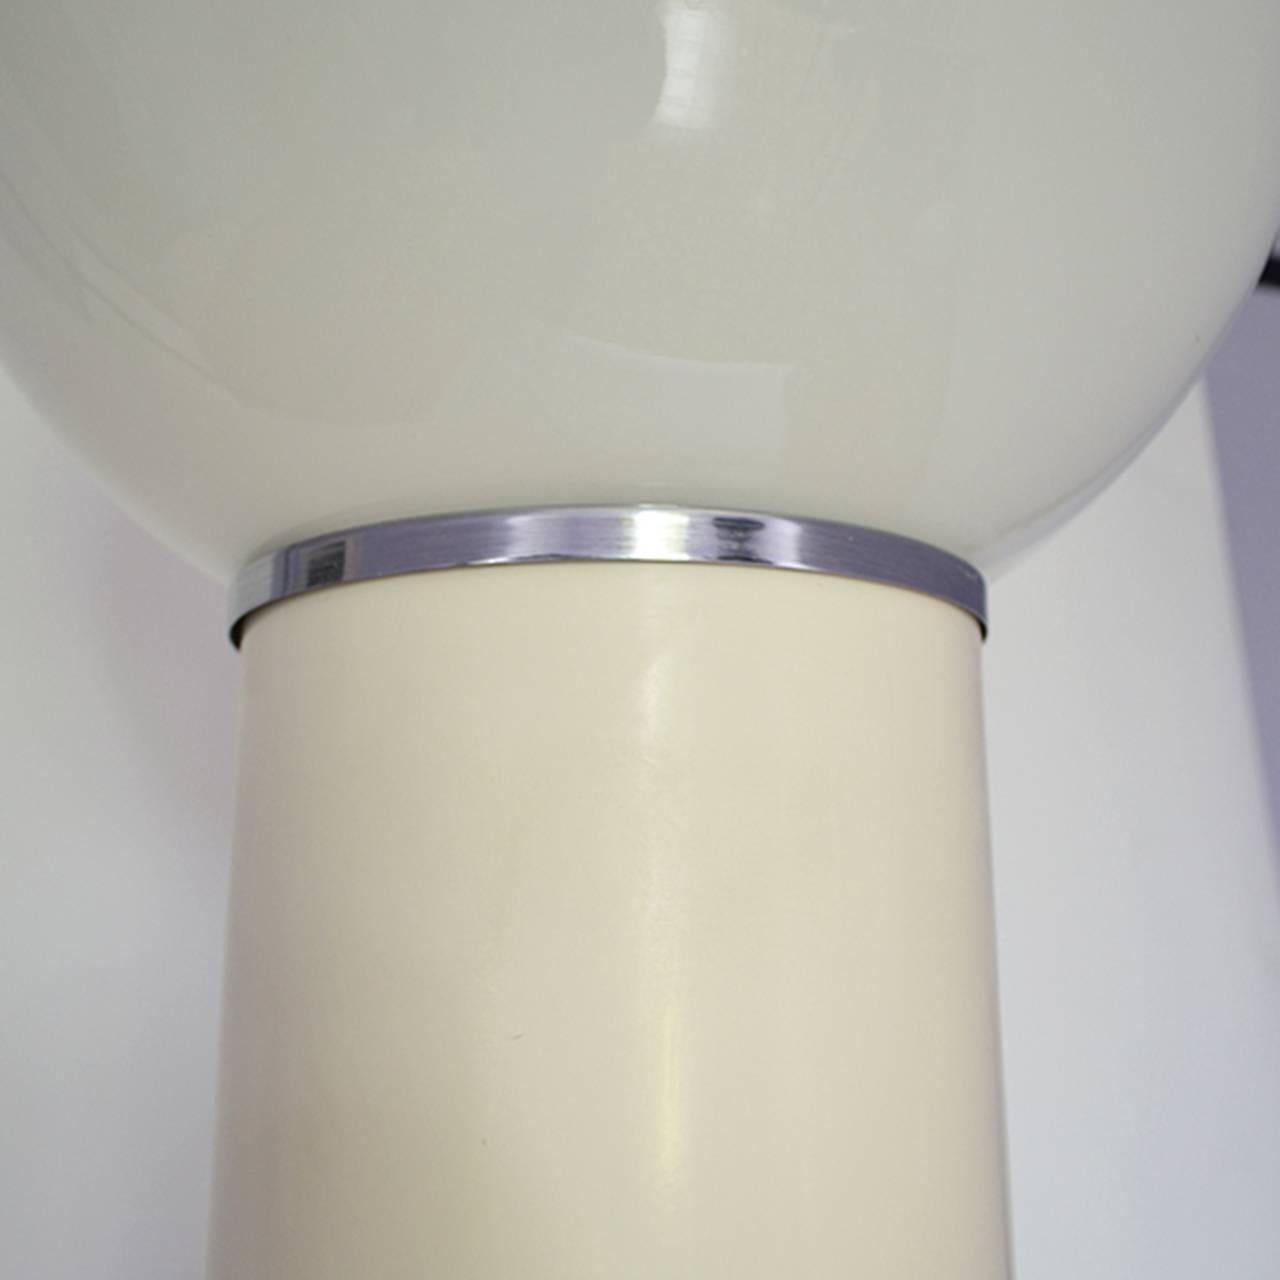 Fiberglass support, chrome and a big white opaline glass ball floor lamp
by Kartell, first year manufacture was 1968.